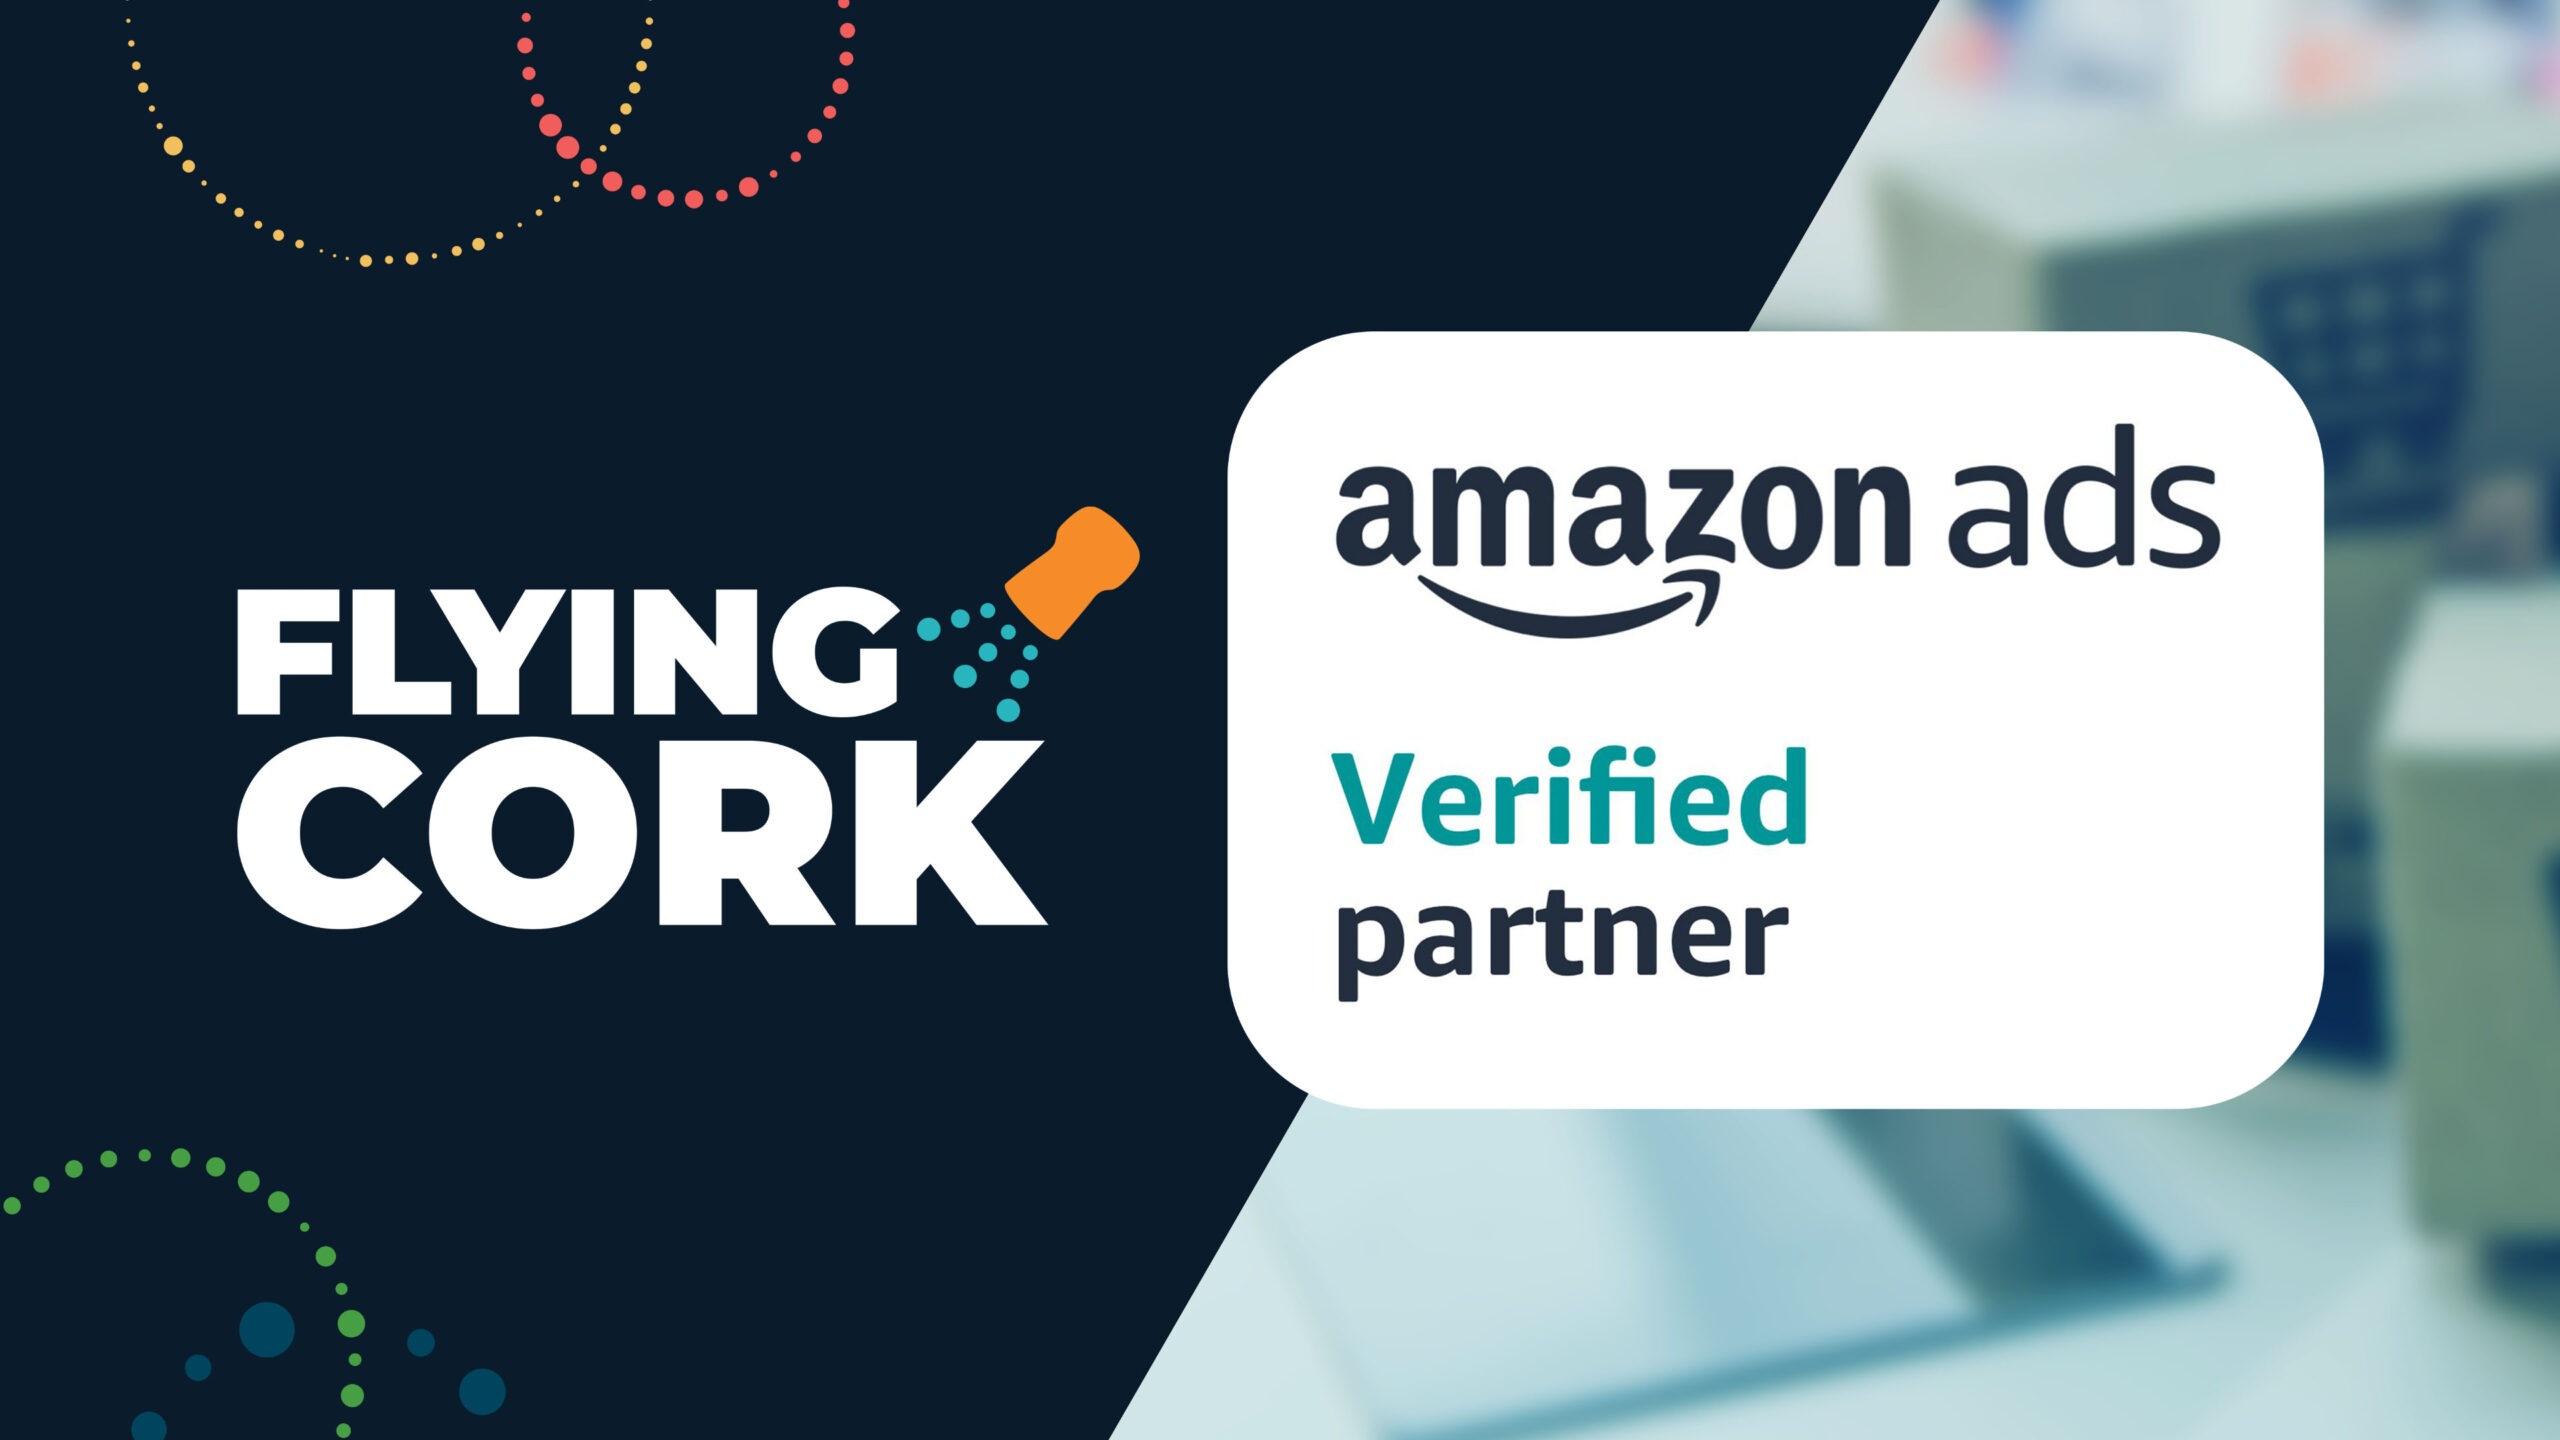 Flying Cork Recognized as an Amazon Ads Verified Partner